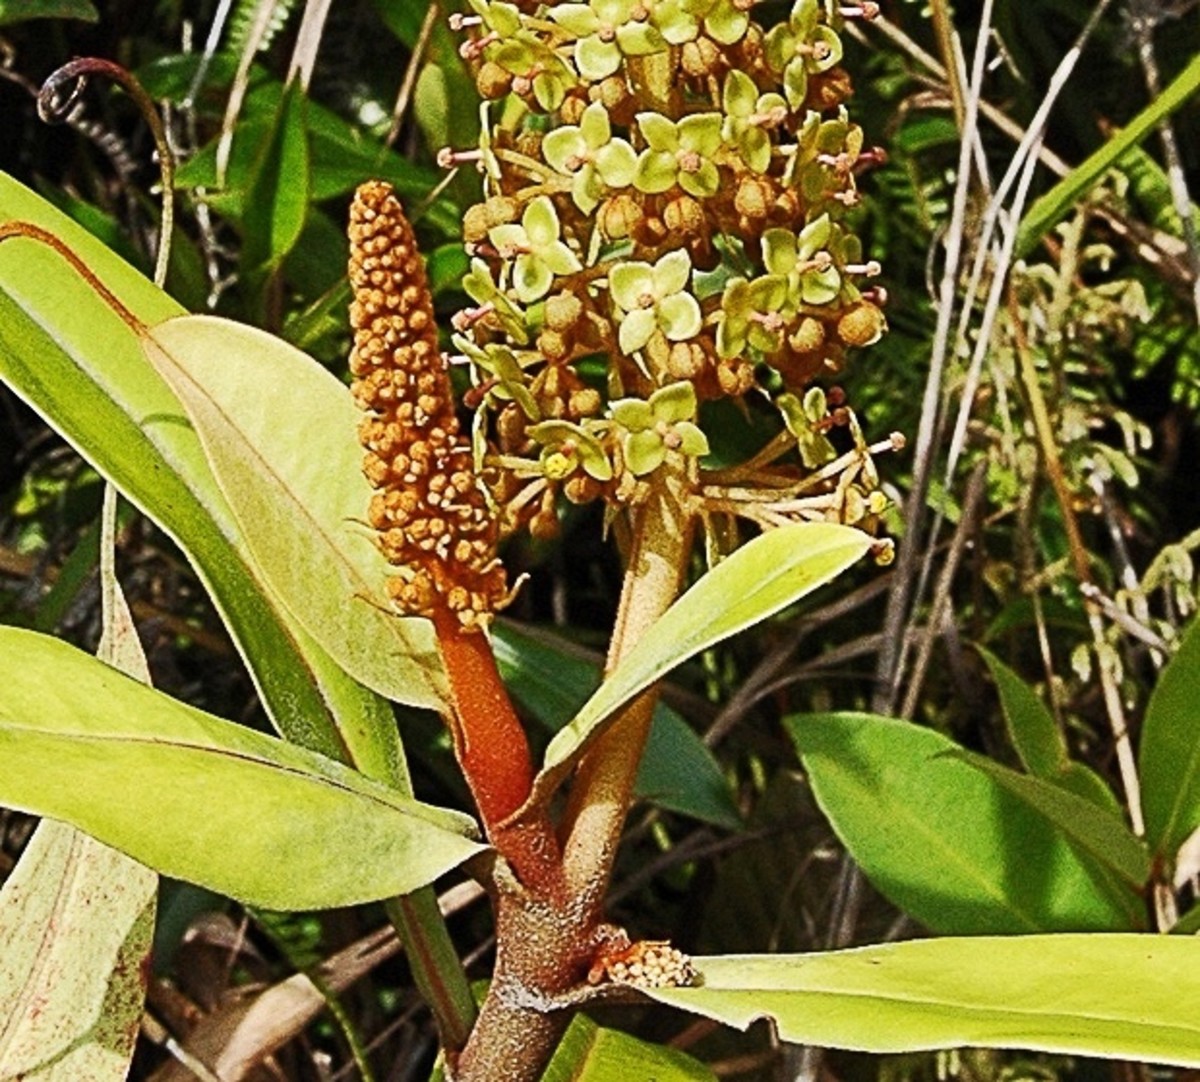 Panicles and flowers of Nepenthes ampullaria